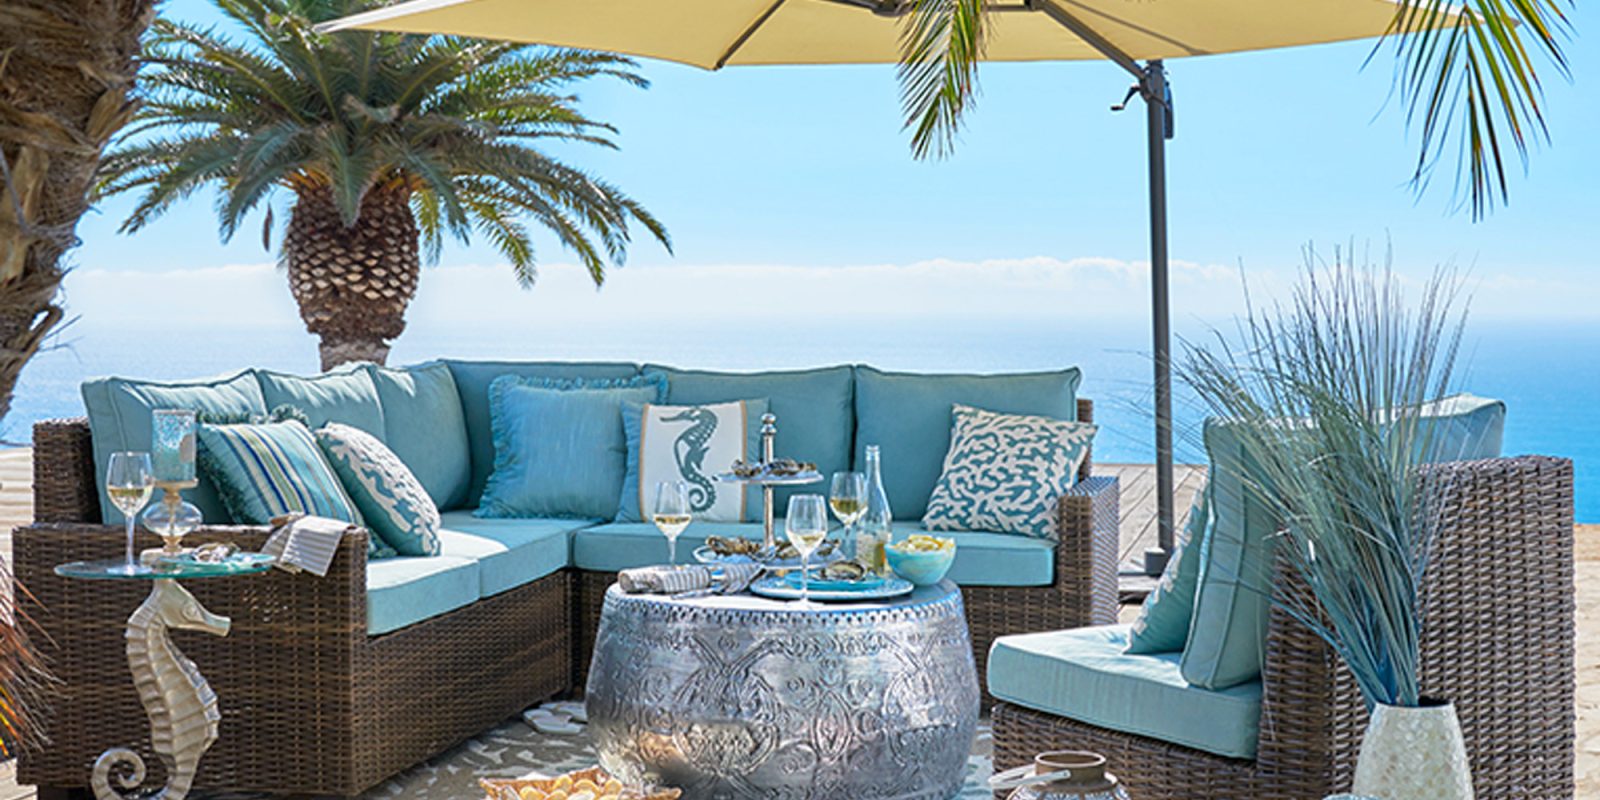 Pier One S Hello Outdoor Sale Gets You Ready For Warm Weather With